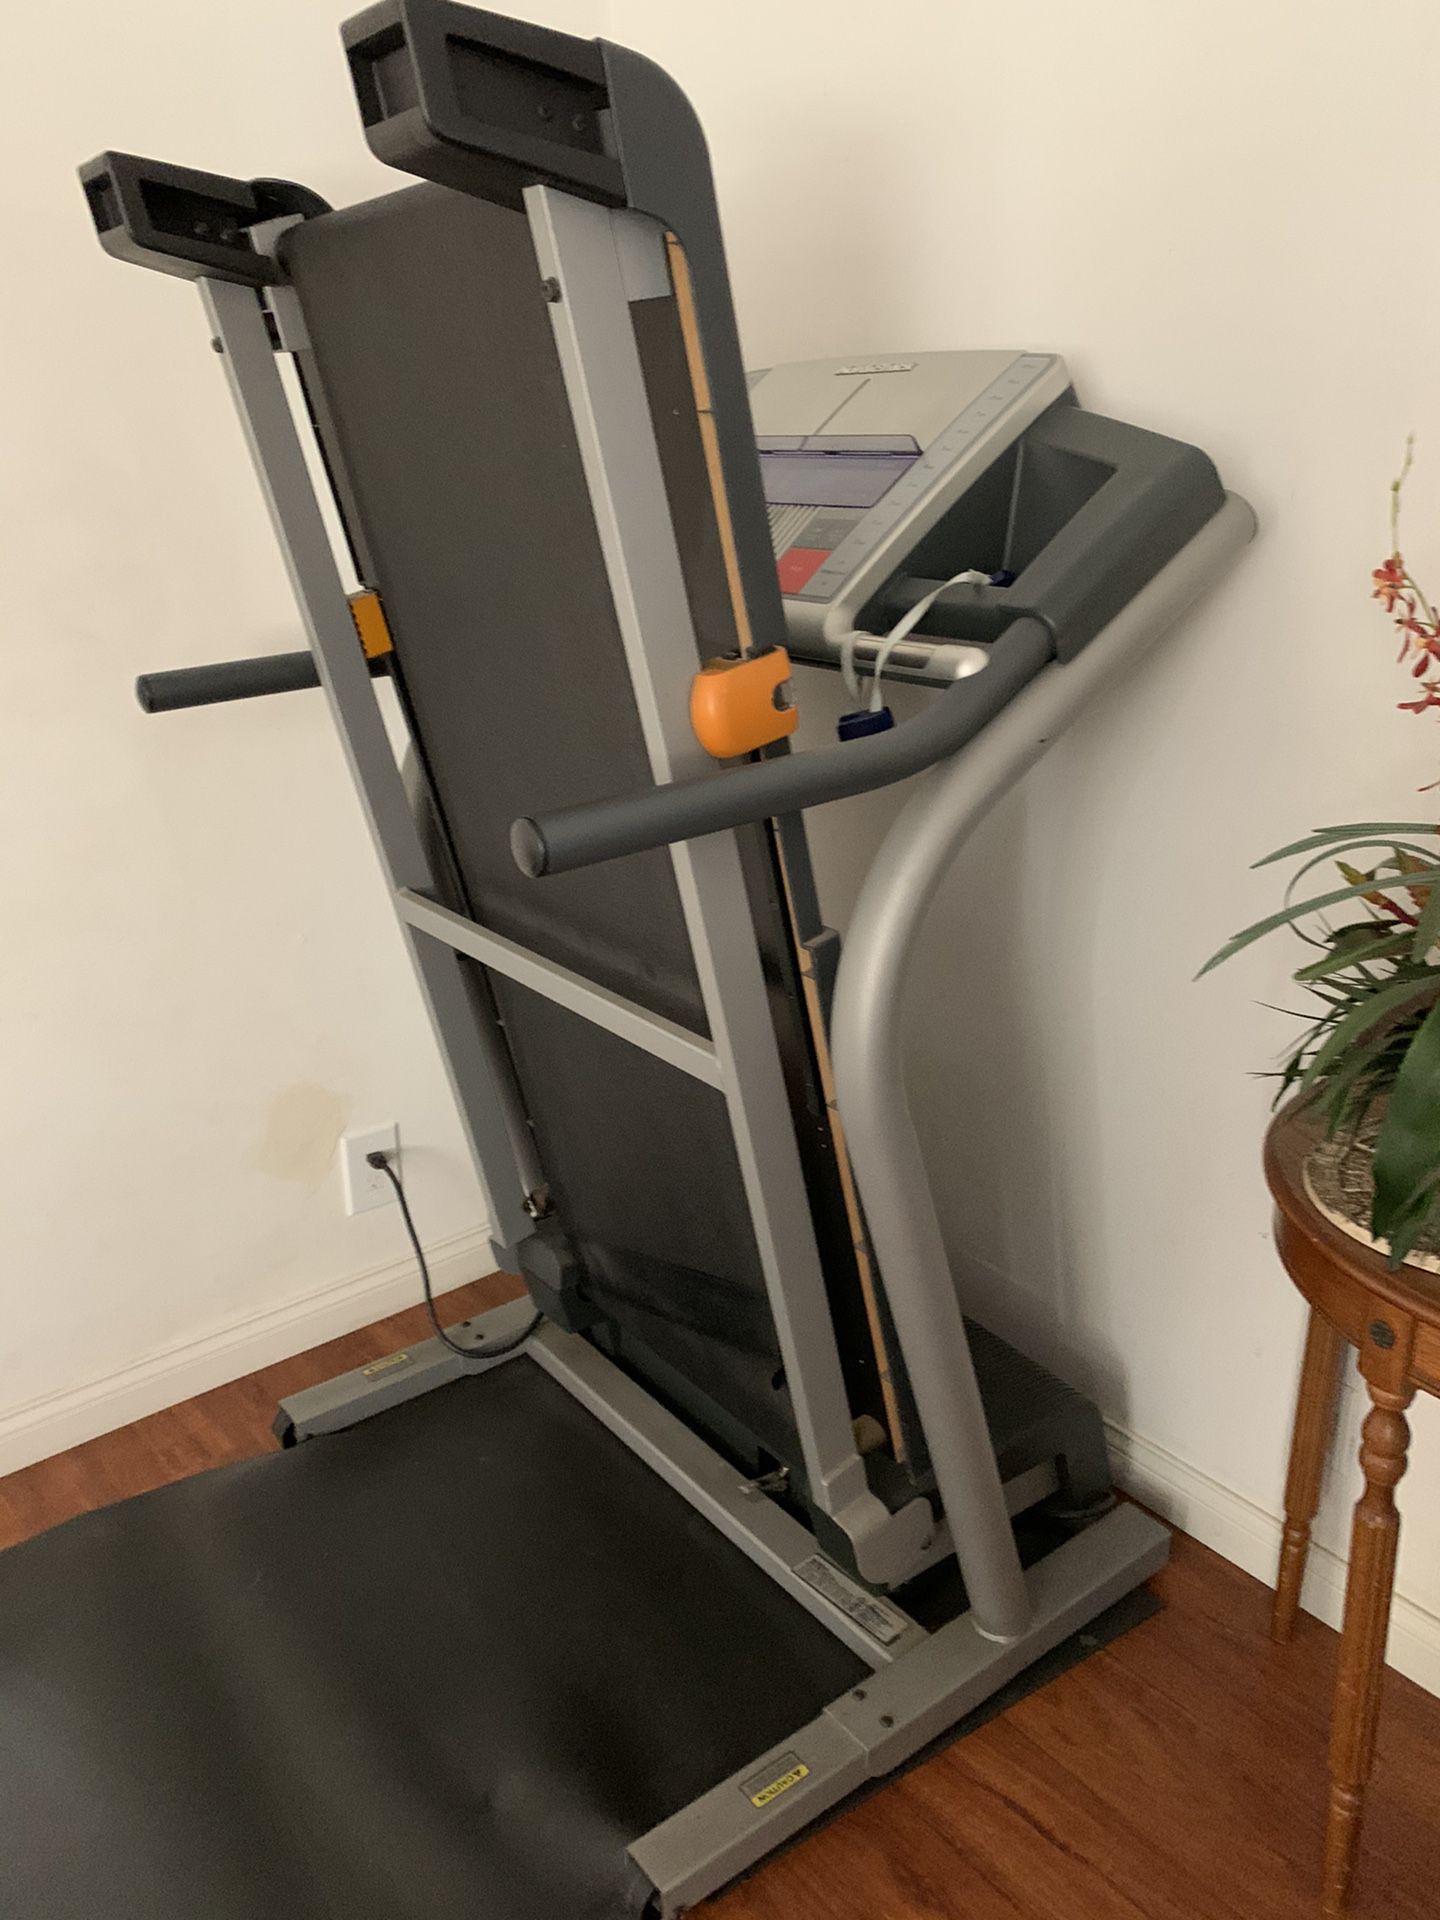 Treadmill Nordictrack C2200 (Make me an offer i can’t refuse)